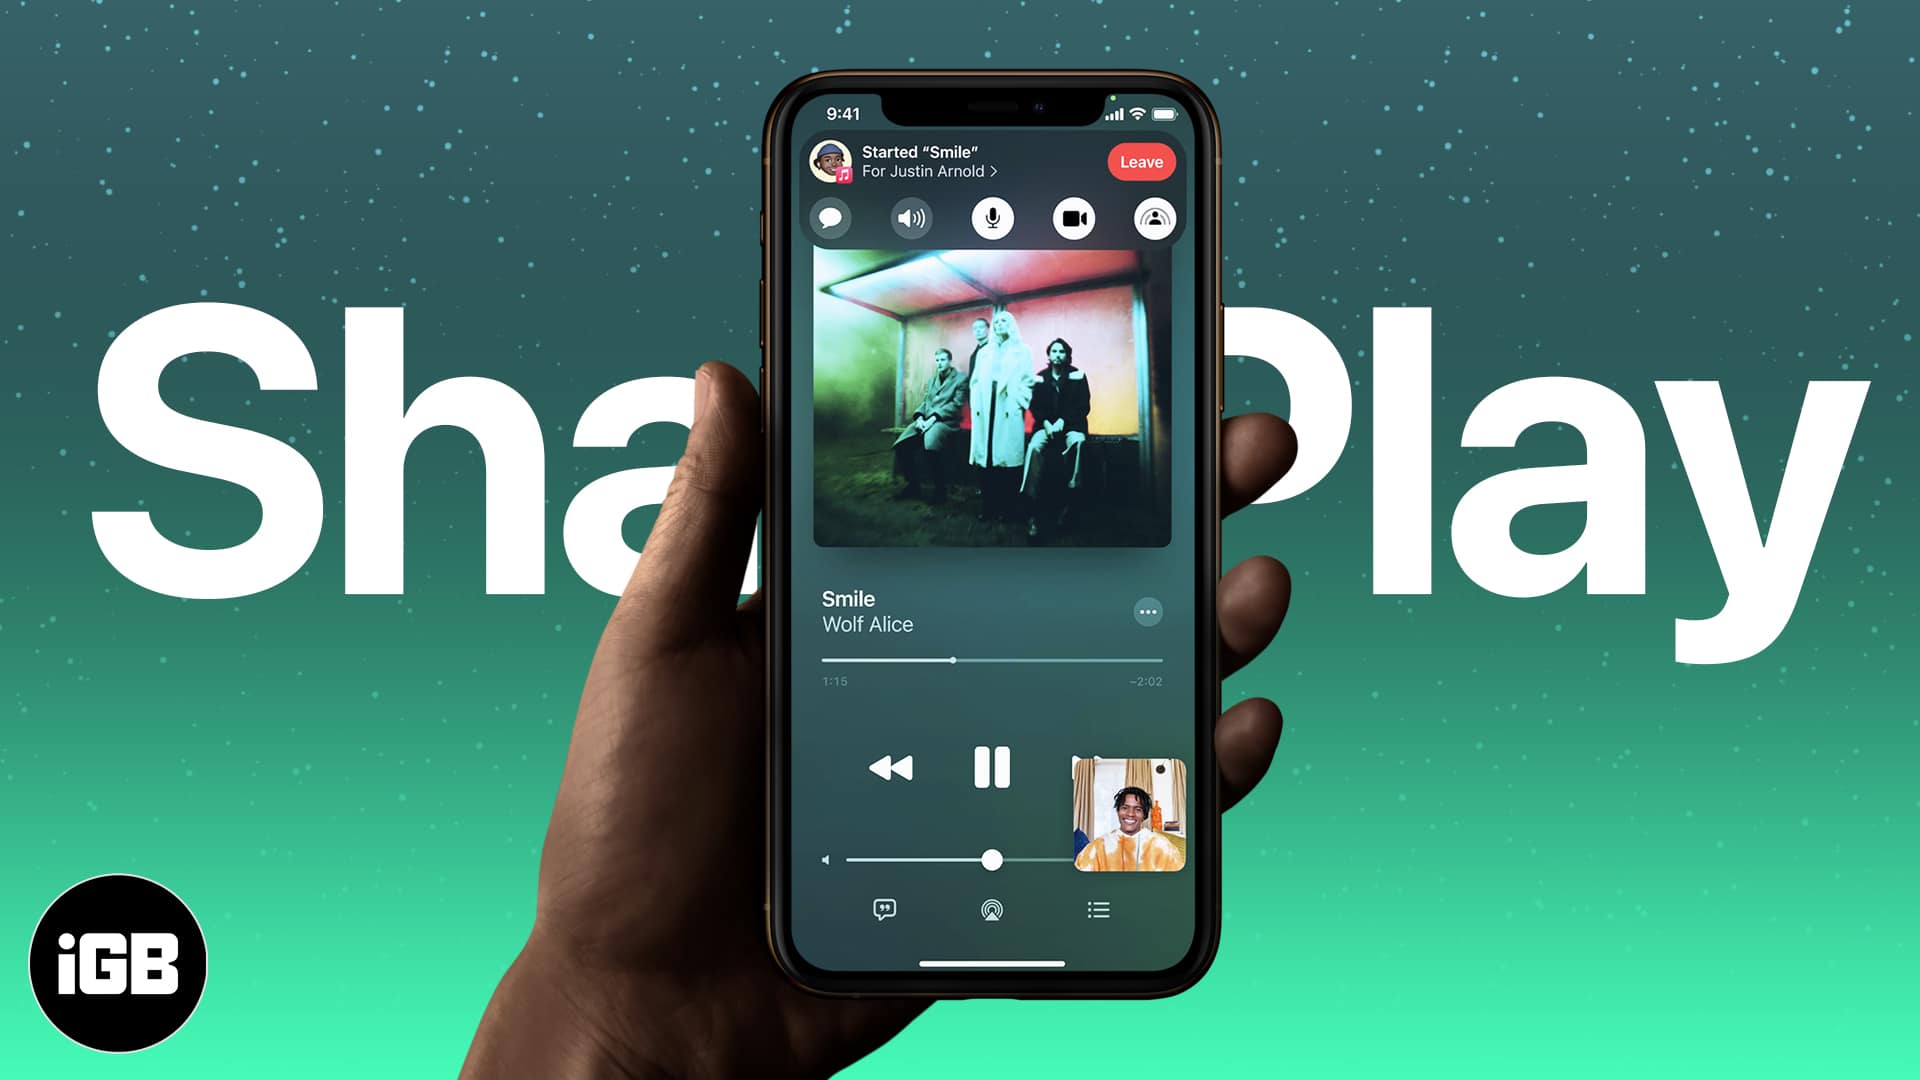 How to use SharePlay in FaceTime in iOS 15 on iPhone